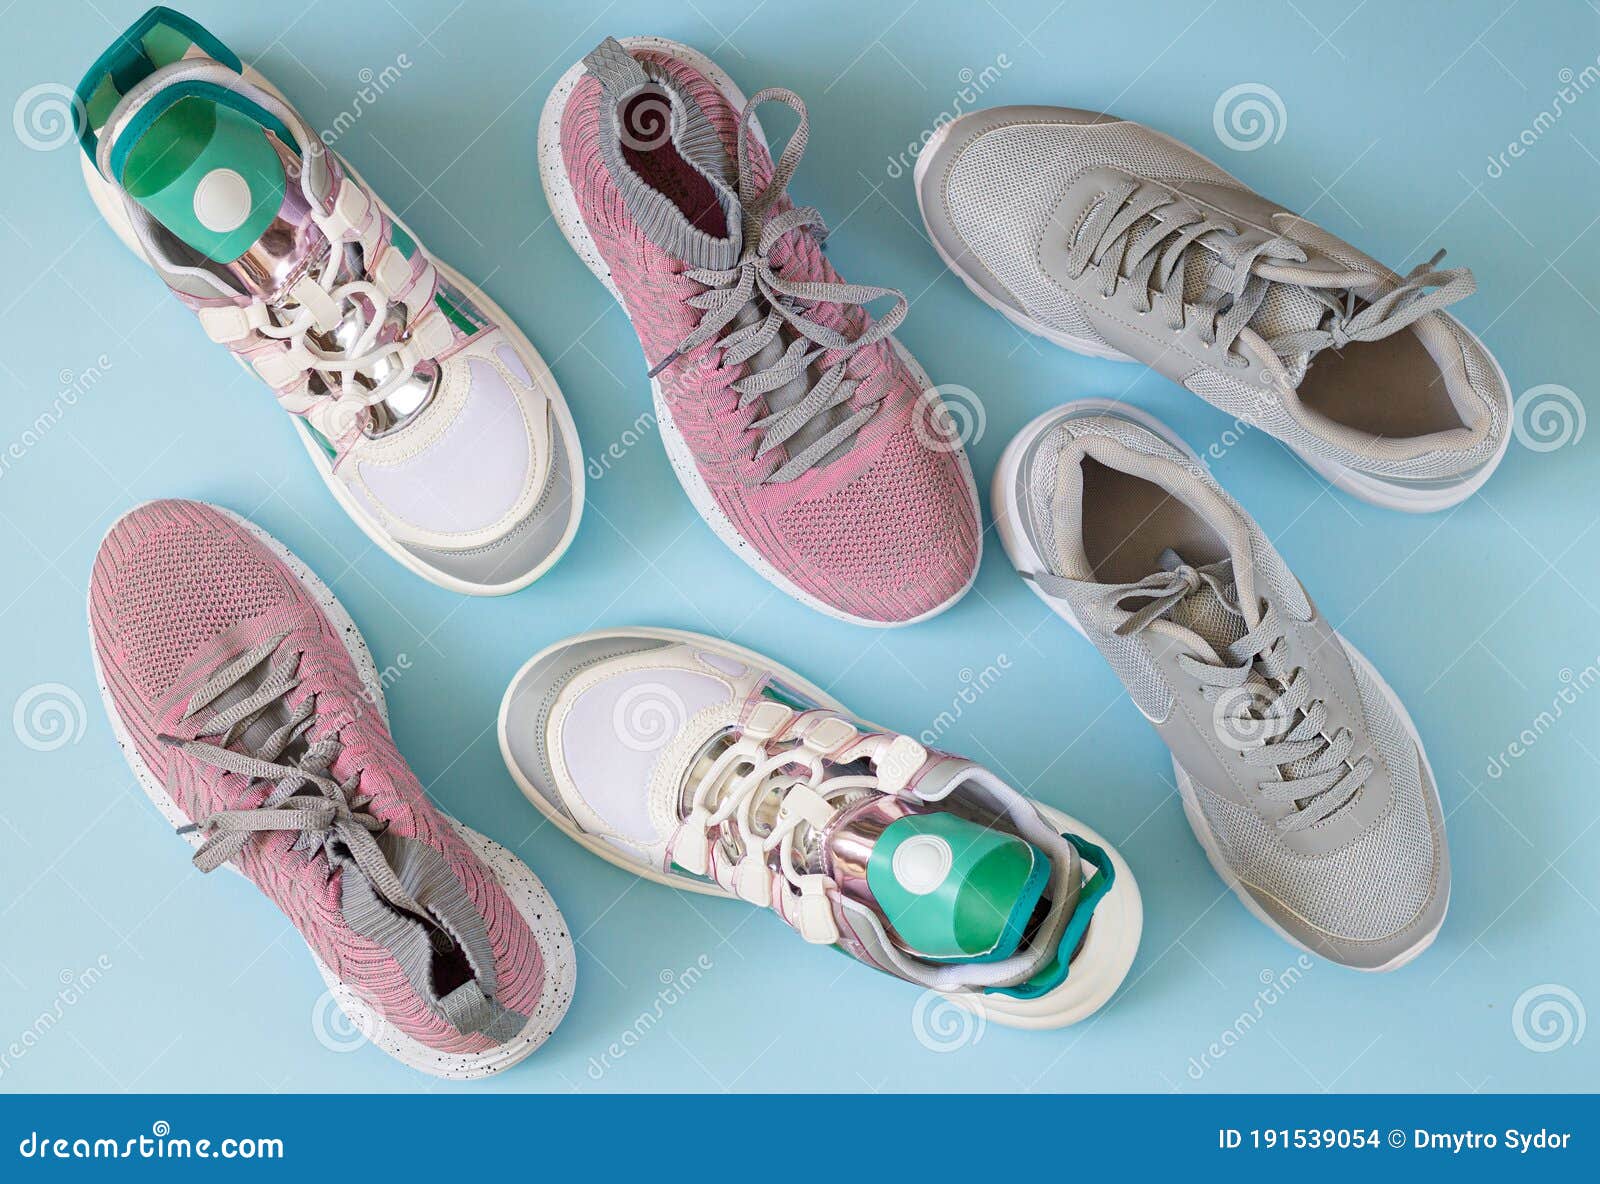 Set of Sport Shoes Top View on Light Stock Photo - Image of fashion ...